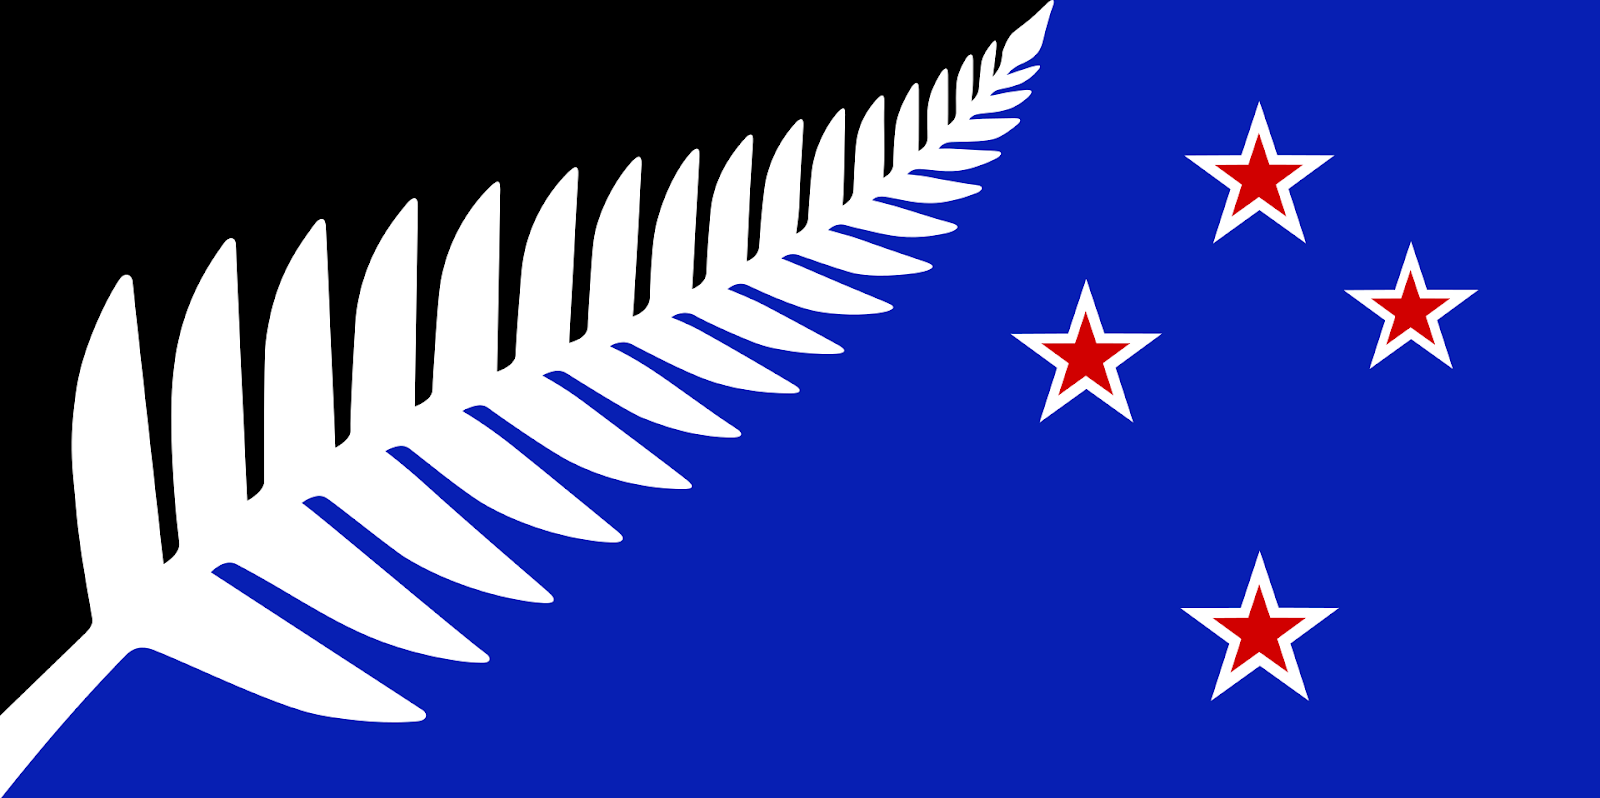 Flag with a black upper left corner crossed by a diagonal 'silver fern' on the left, and and four red stars outlined in white representing the constellation of the Southern Cross on the royal blue background of the right side.